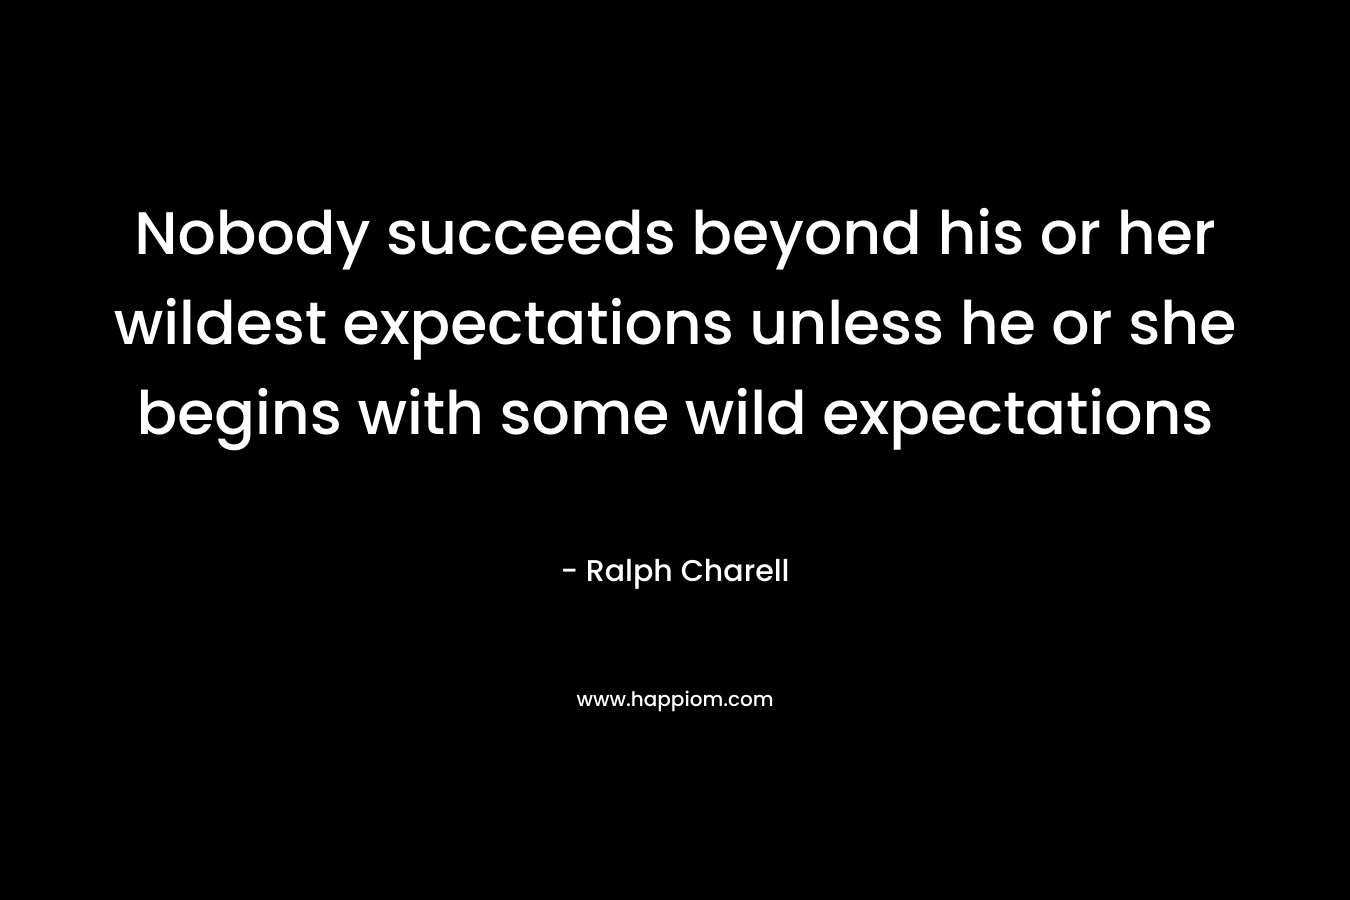 Nobody succeeds beyond his or her wildest expectations unless he or she begins with some wild expectations